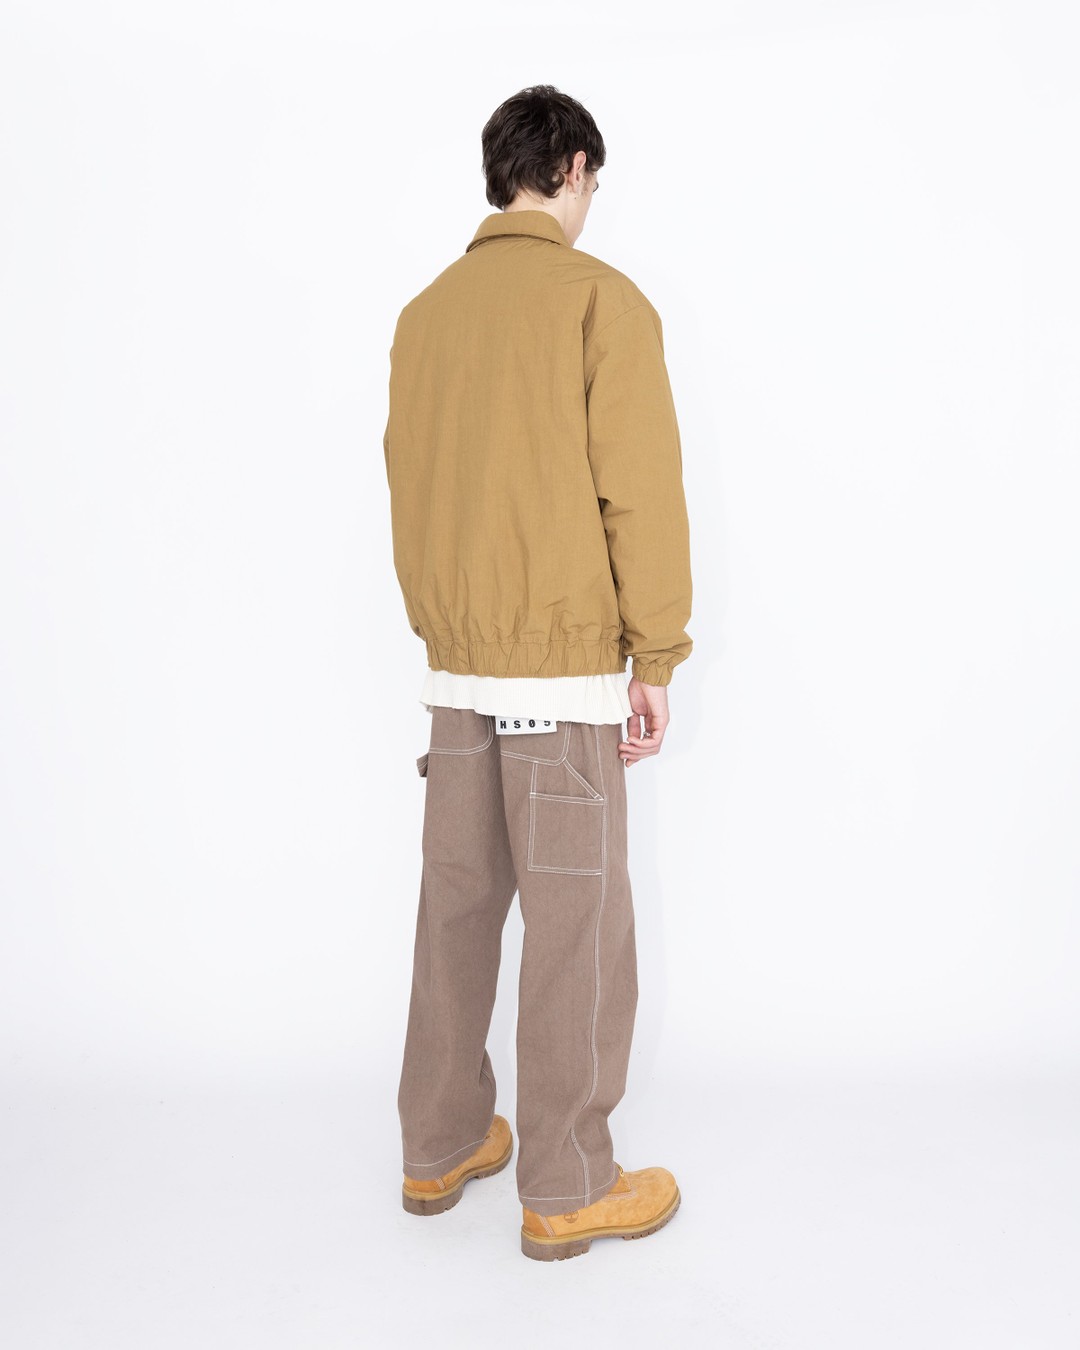 Highsnobiety HS05 – Reverse Piping Insulated Jacket Beige - Outerwear - Beige - Image 5